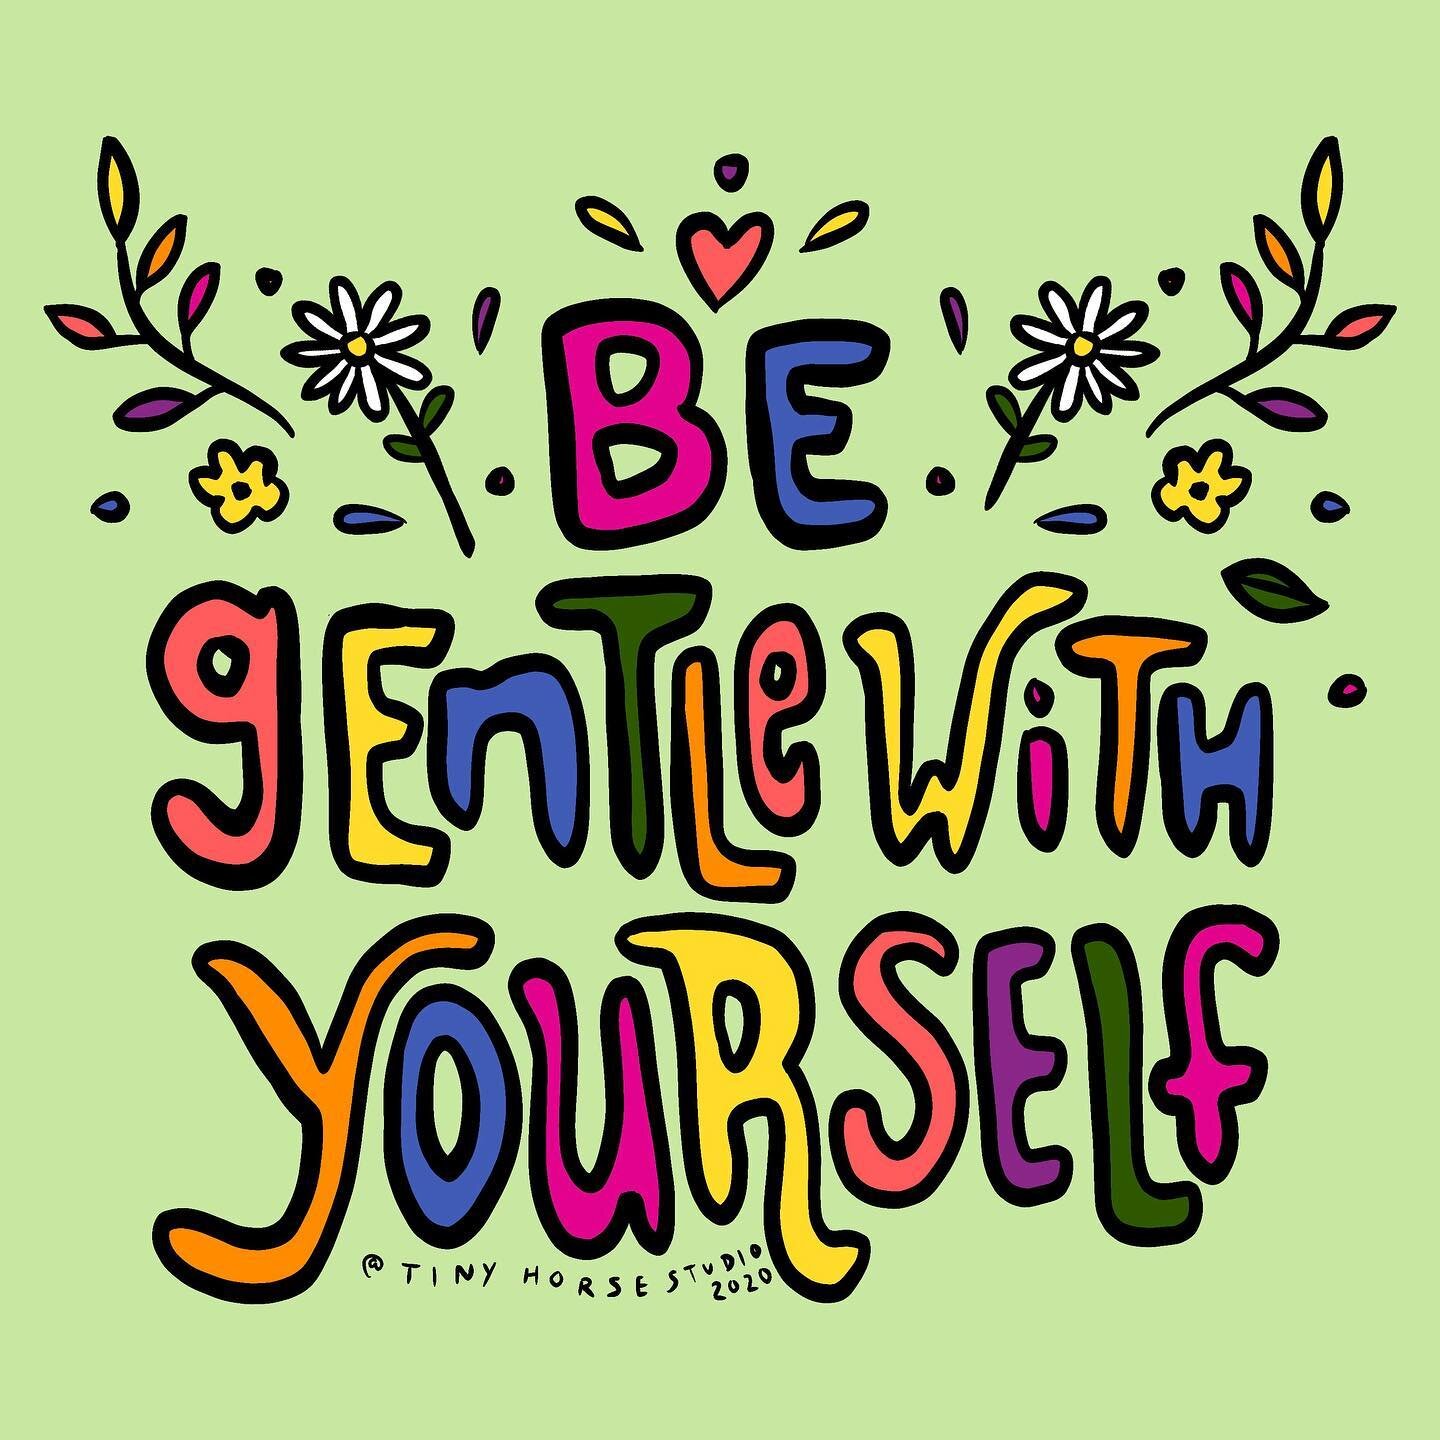 My Fundamental Truth number 7- &ldquo;Be gentle with yourself&rdquo; 

This is something I feel I am continuously relearning. I have heard it in the past, but I think, for me, the shitshow of last year really helped solidify this idea. 

I realized I